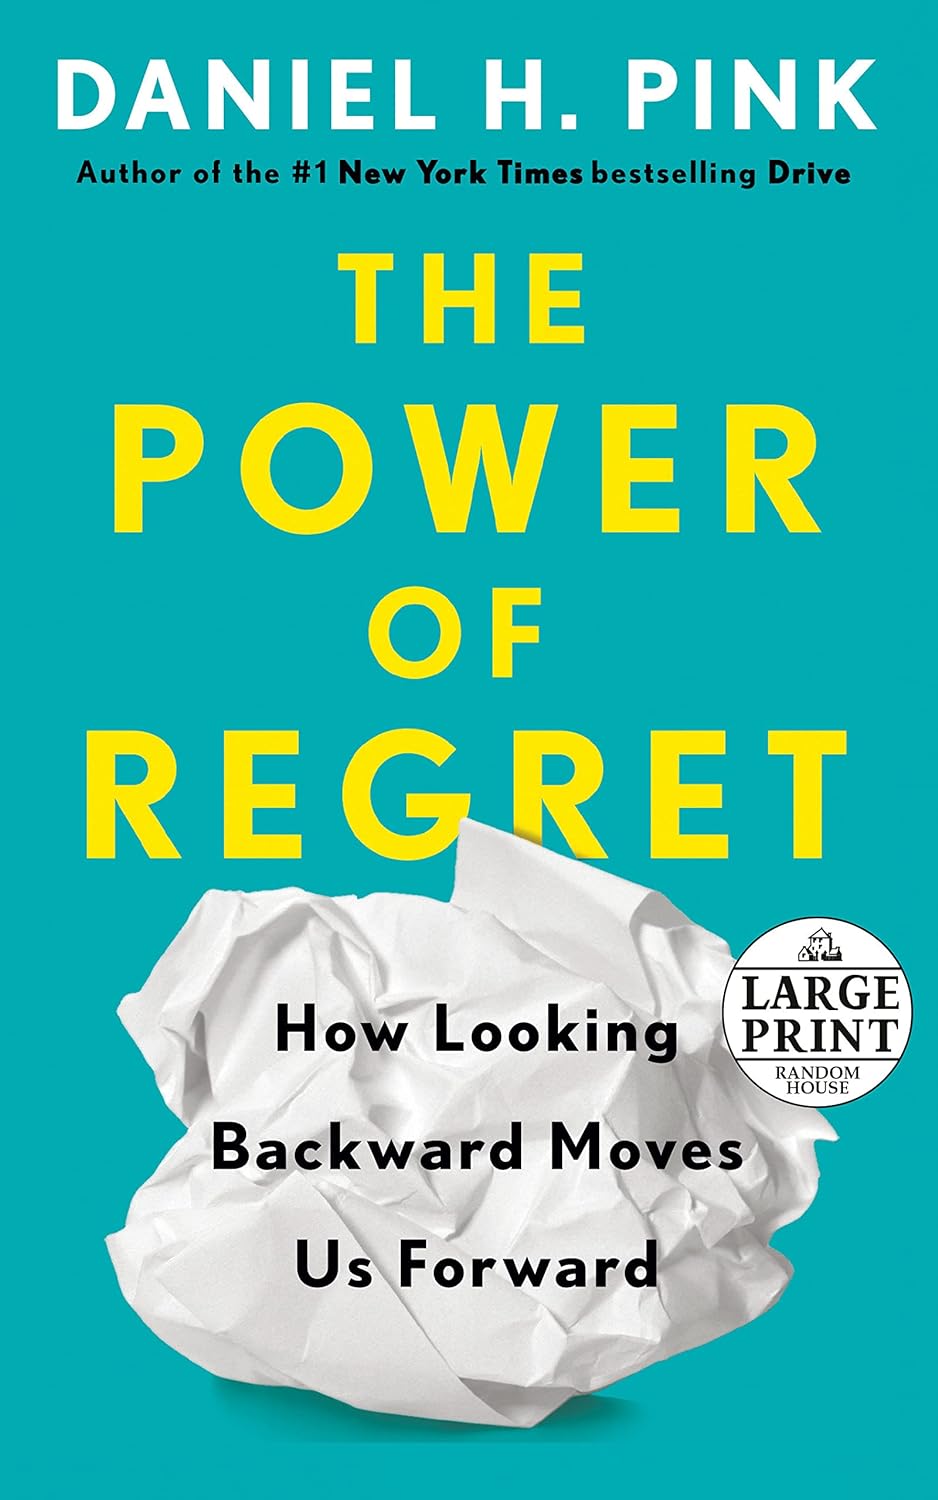 Looking Backward to Move Forward Based on ideas in The Power of Regret by Dan Pink